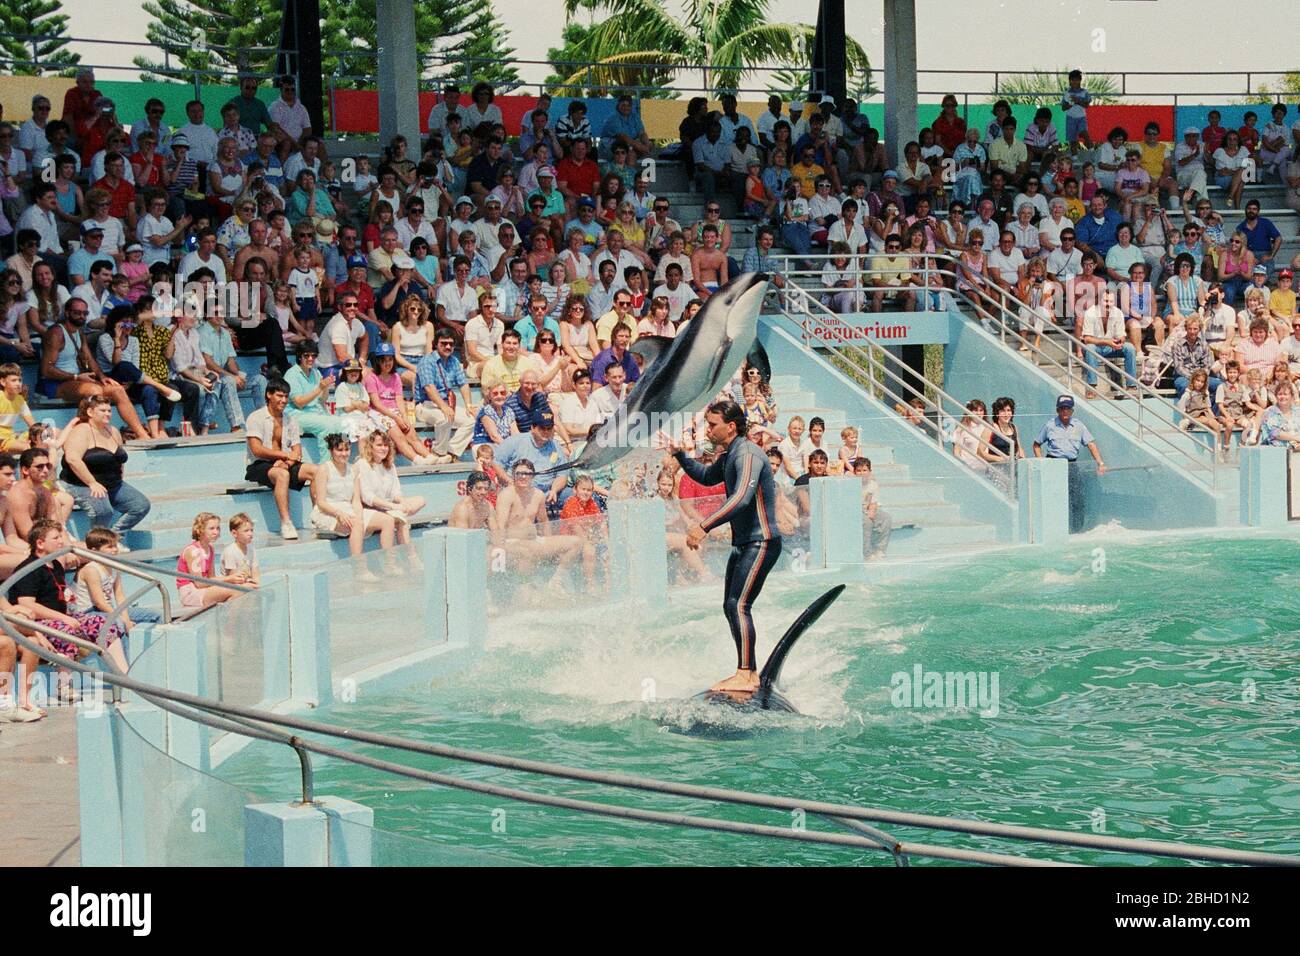 A trainer rides on a killer whale during a performance at Miami Seaquarium in the 1980's, Florida, USA Stock Photo